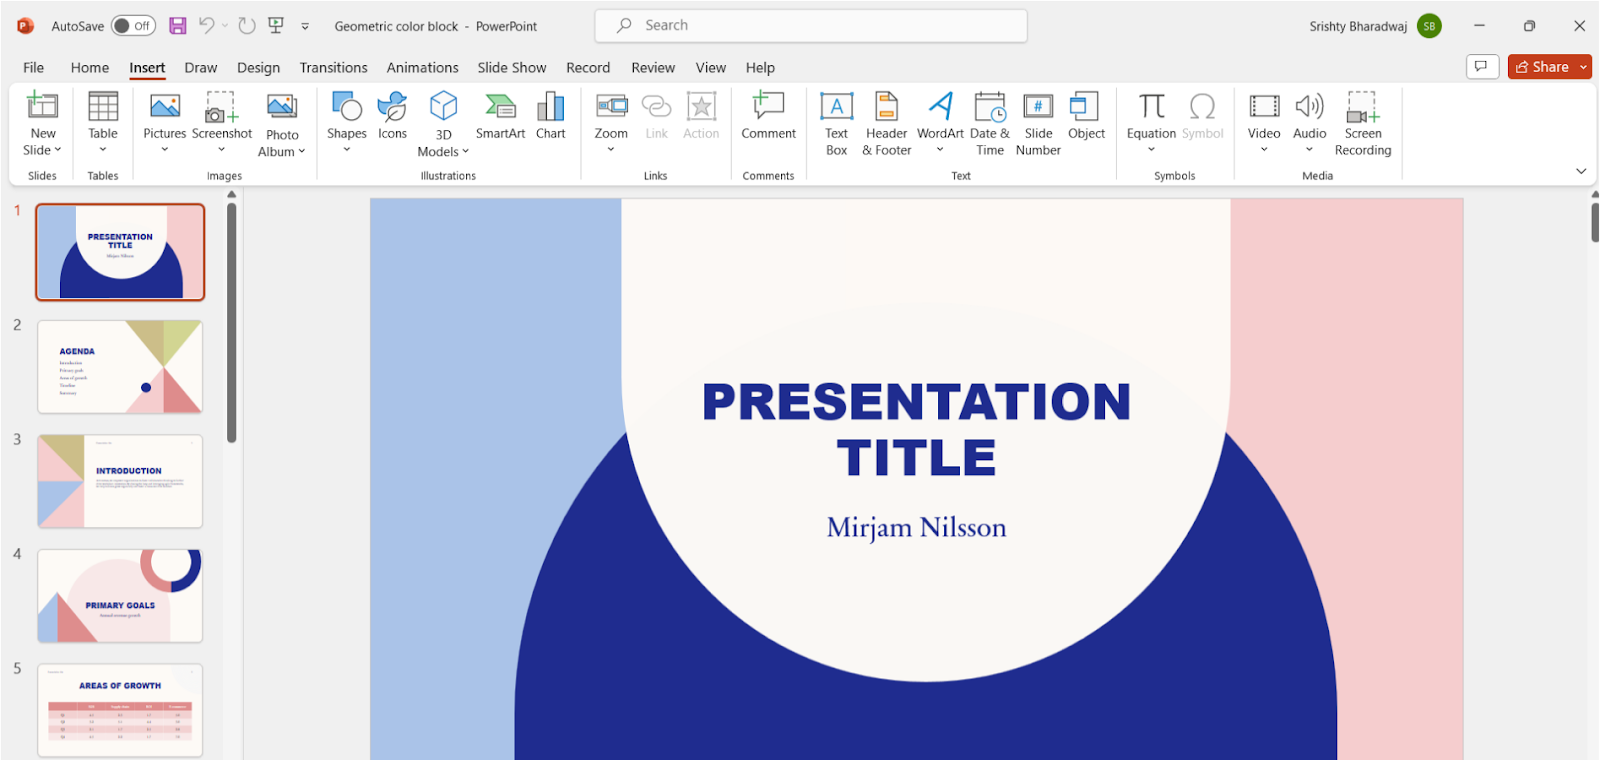 PowerPoint vs Google Slides: embedding options in PowerPoint